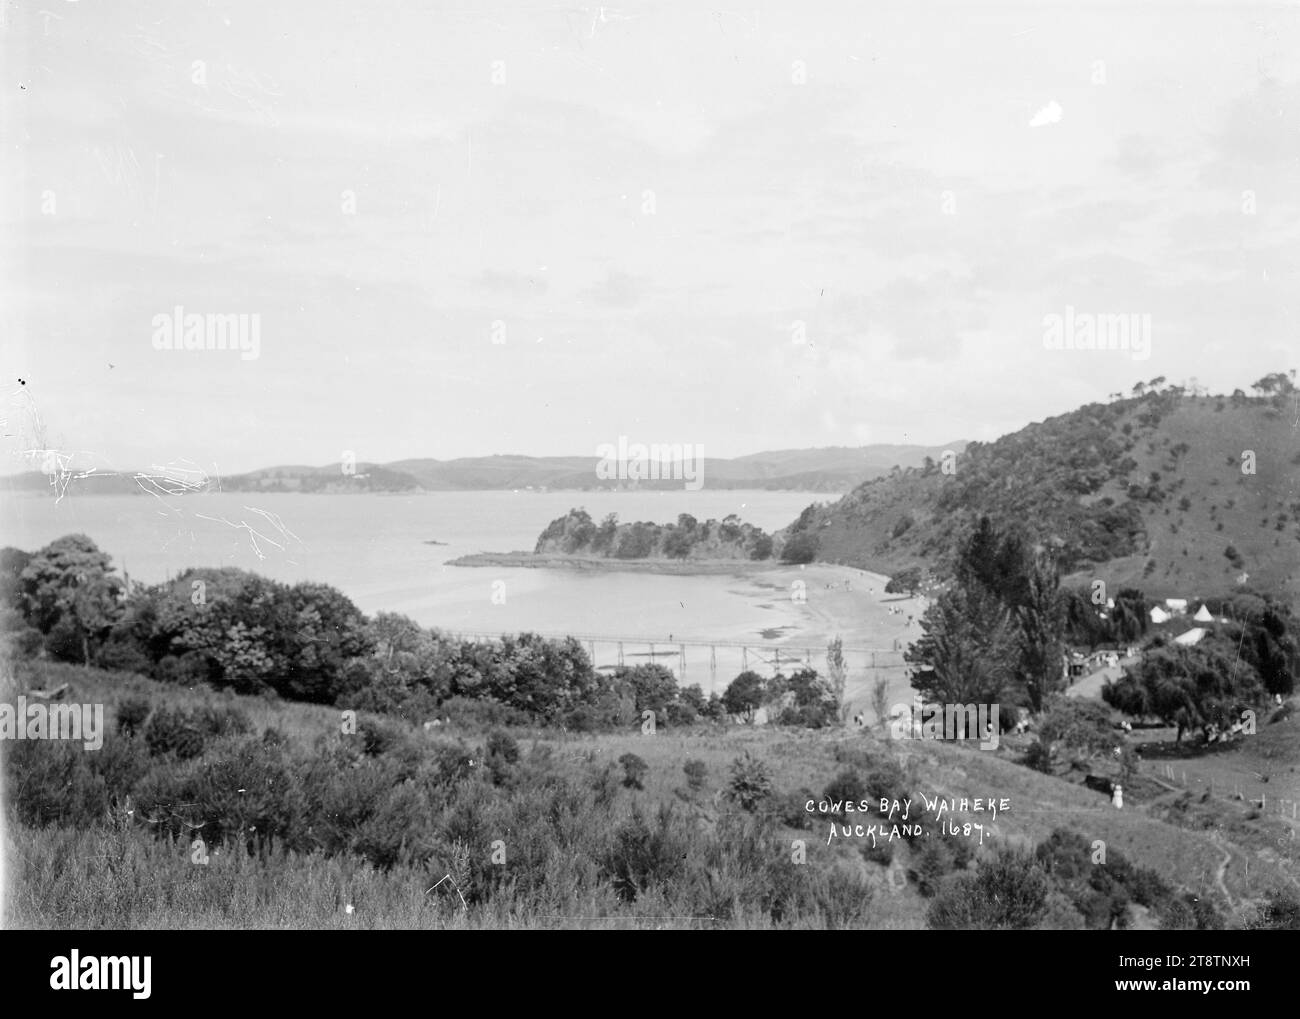 General view of Cowes Bay, Waiheke Island, View of Cowes Bay at low tide taken from a high vantage point to the north of the bay looking south along the bay with Ponui Island is the distance. The wharf can be seen in the middle distance. Tents are visible amongst the trees on the righthandside. People are on the beach and on the grassy slope in the foreground. Photographed in early 1900s Stock Photo